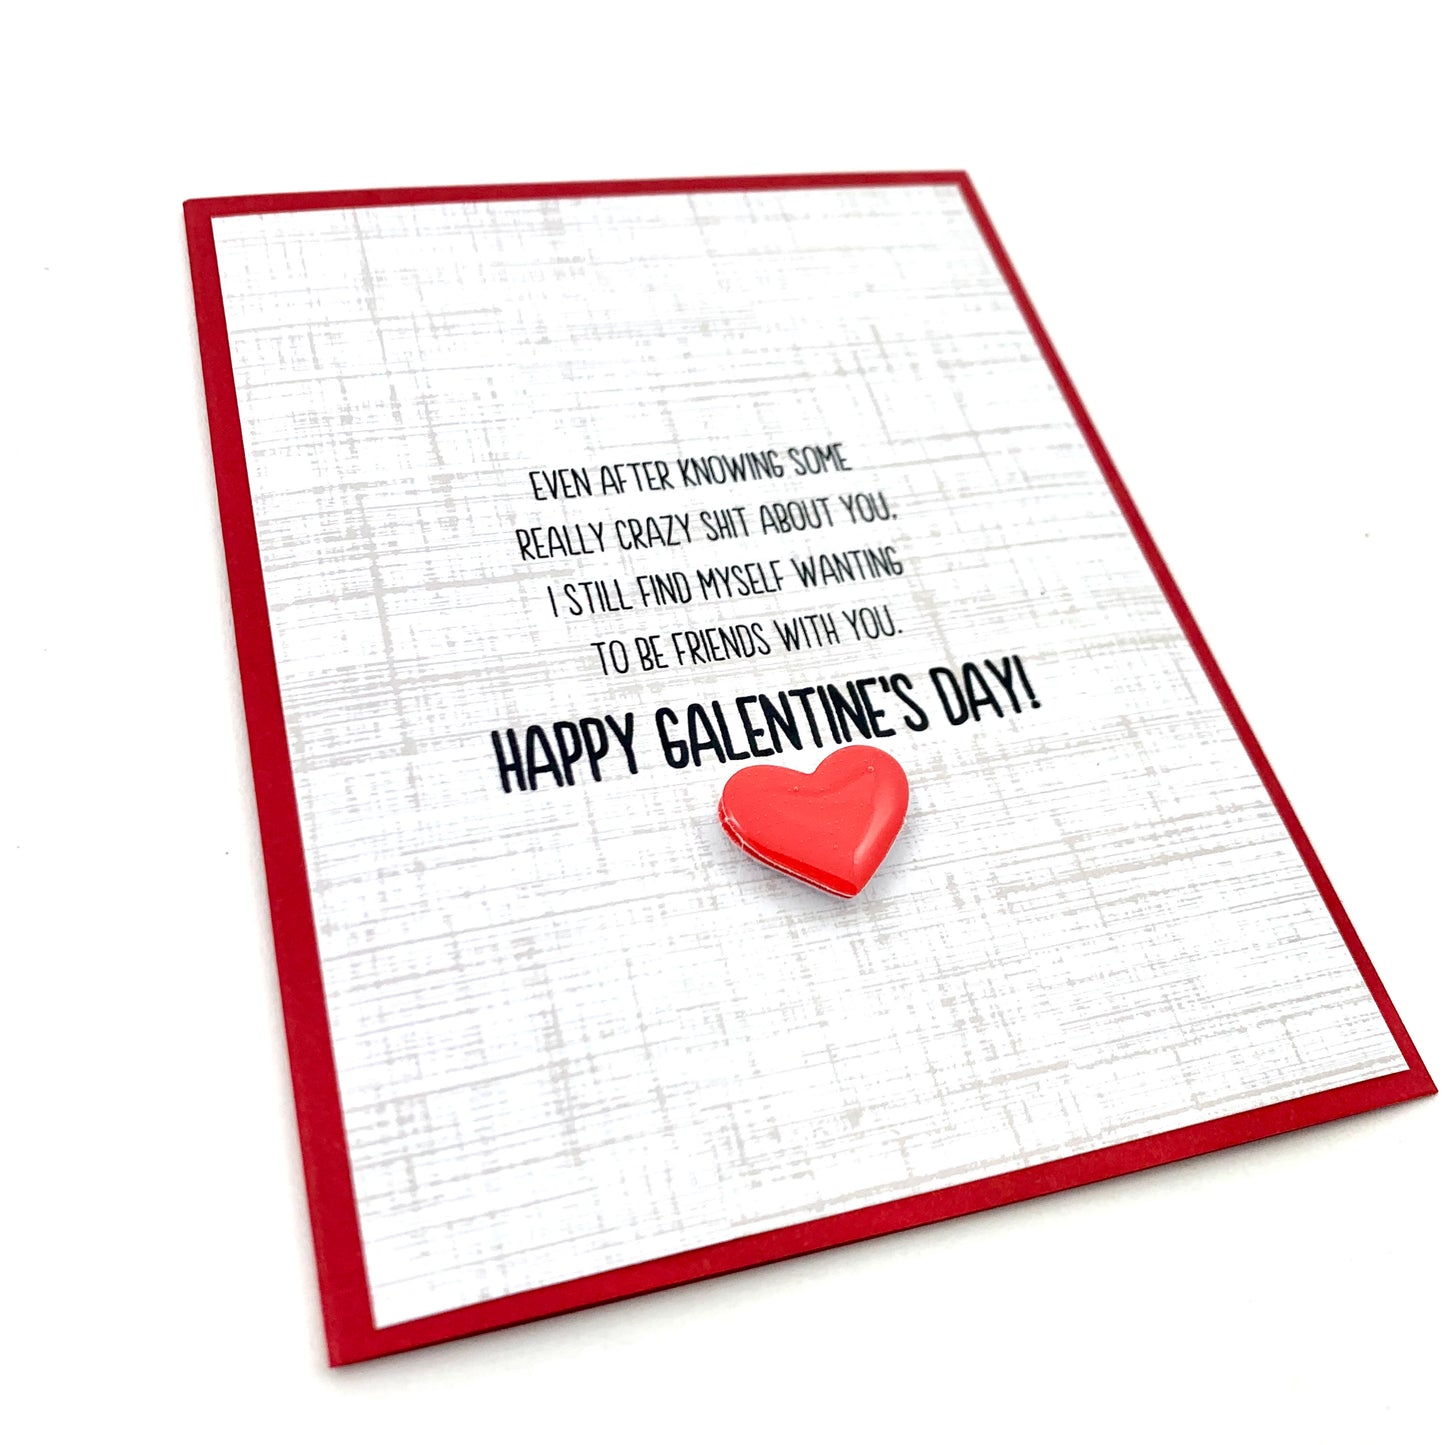 Gal Crazy Shit About You Valentine card